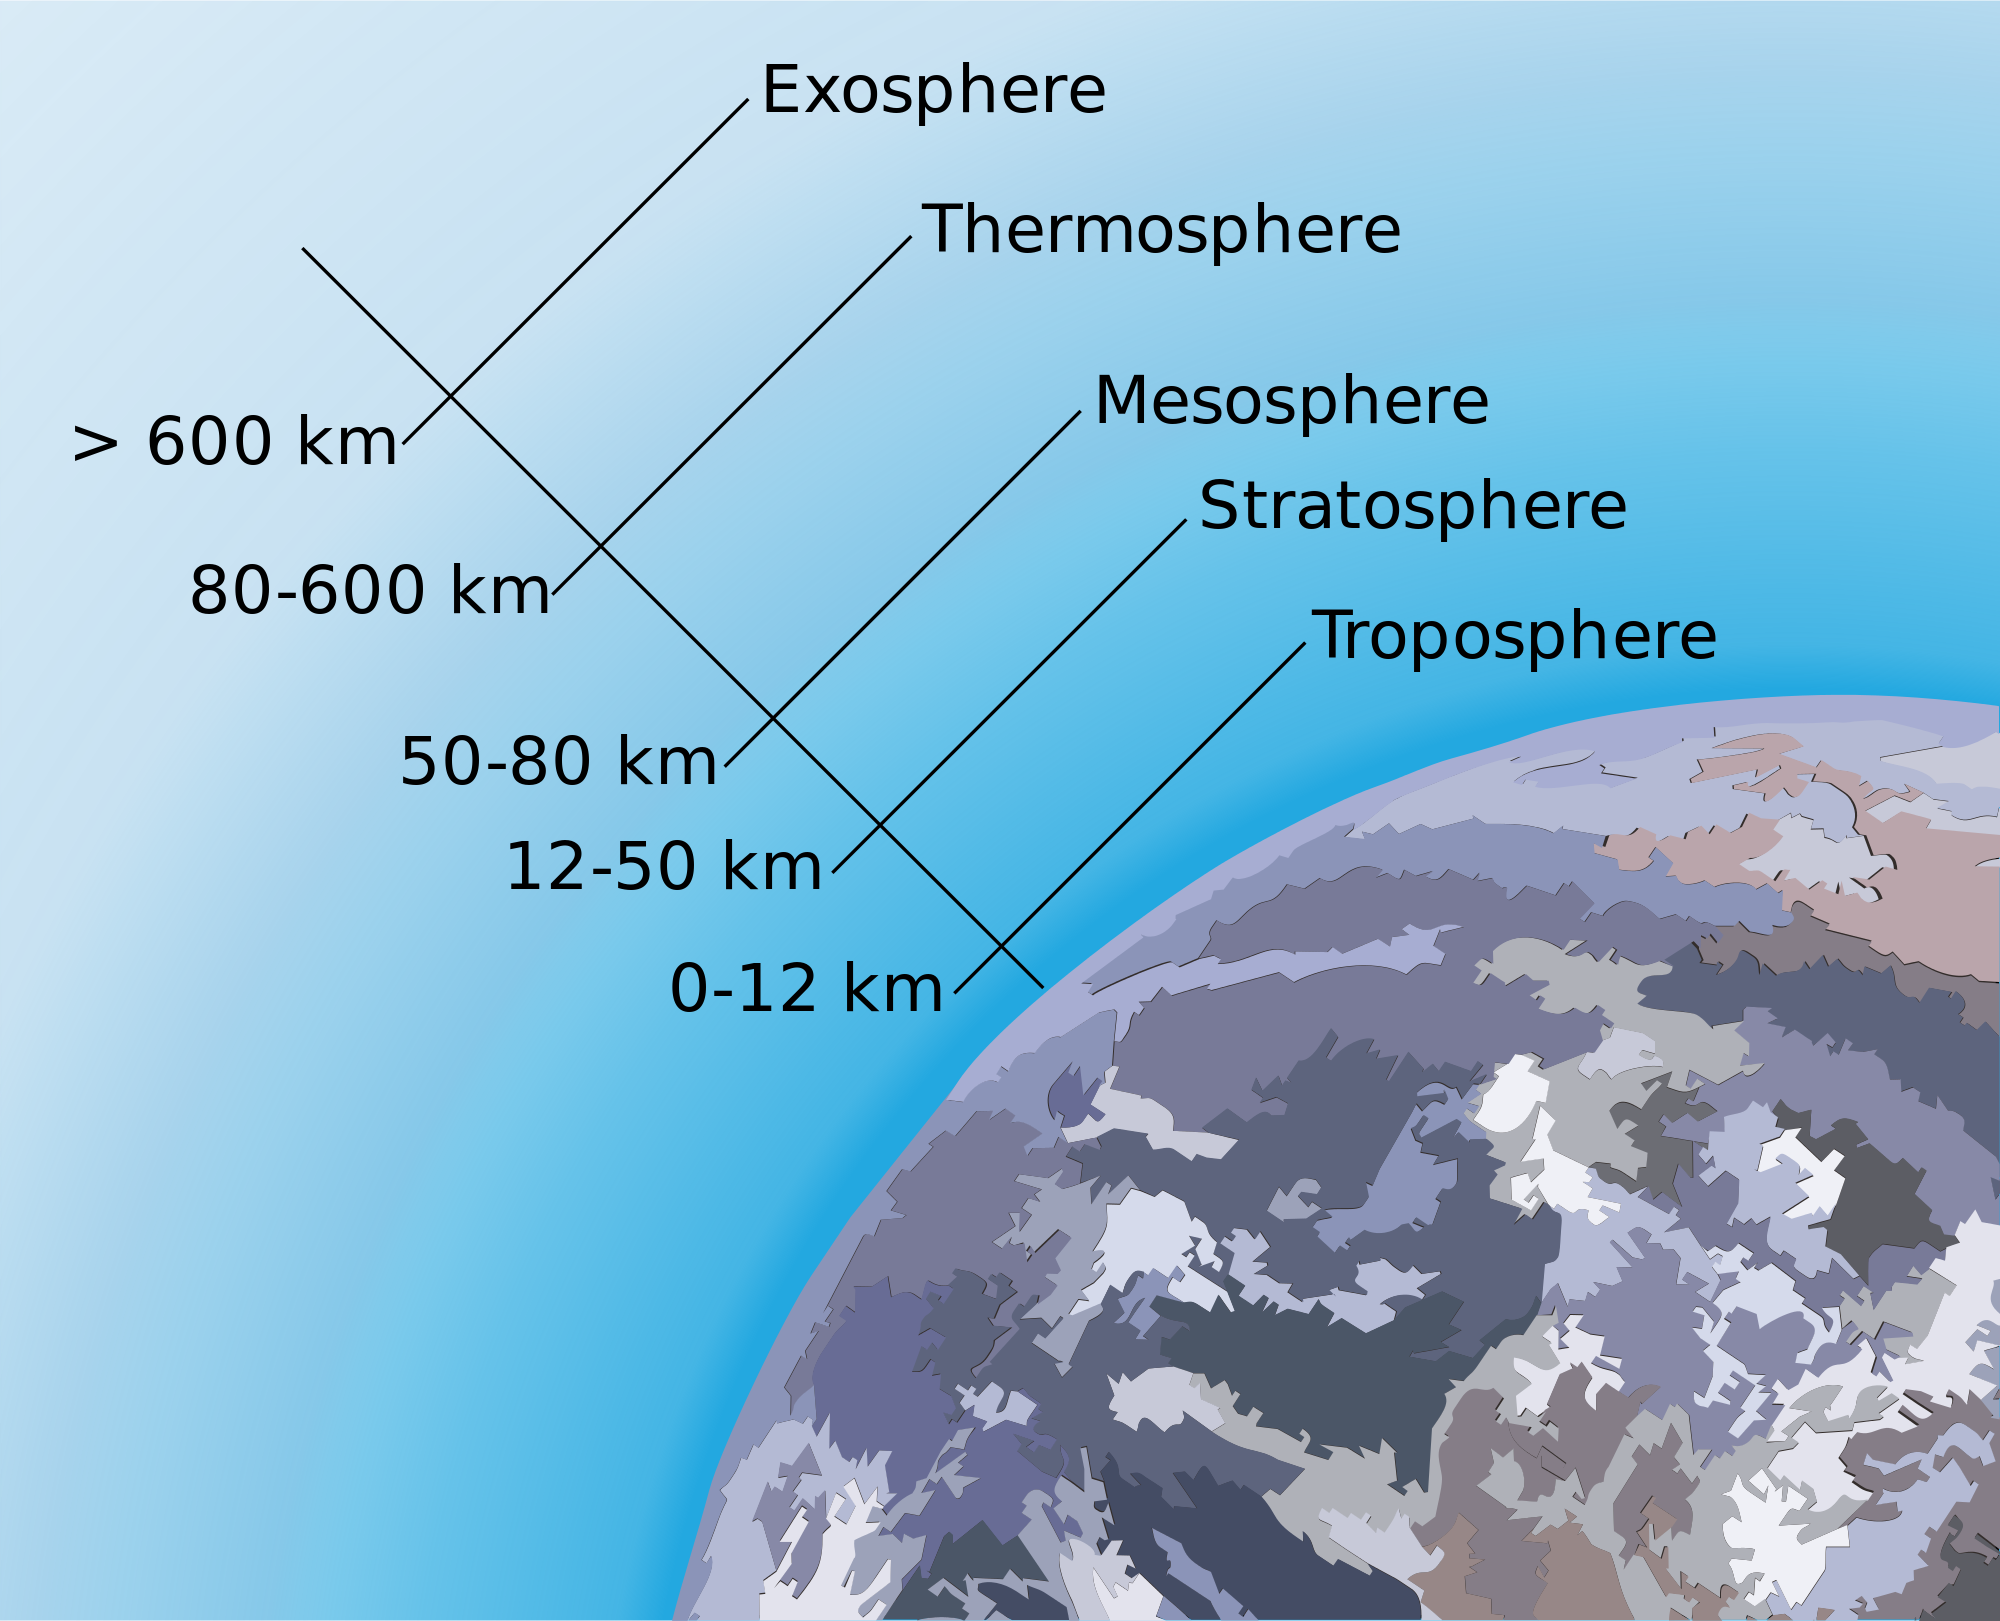 Chapter 6: Analysis of the Atmosphere